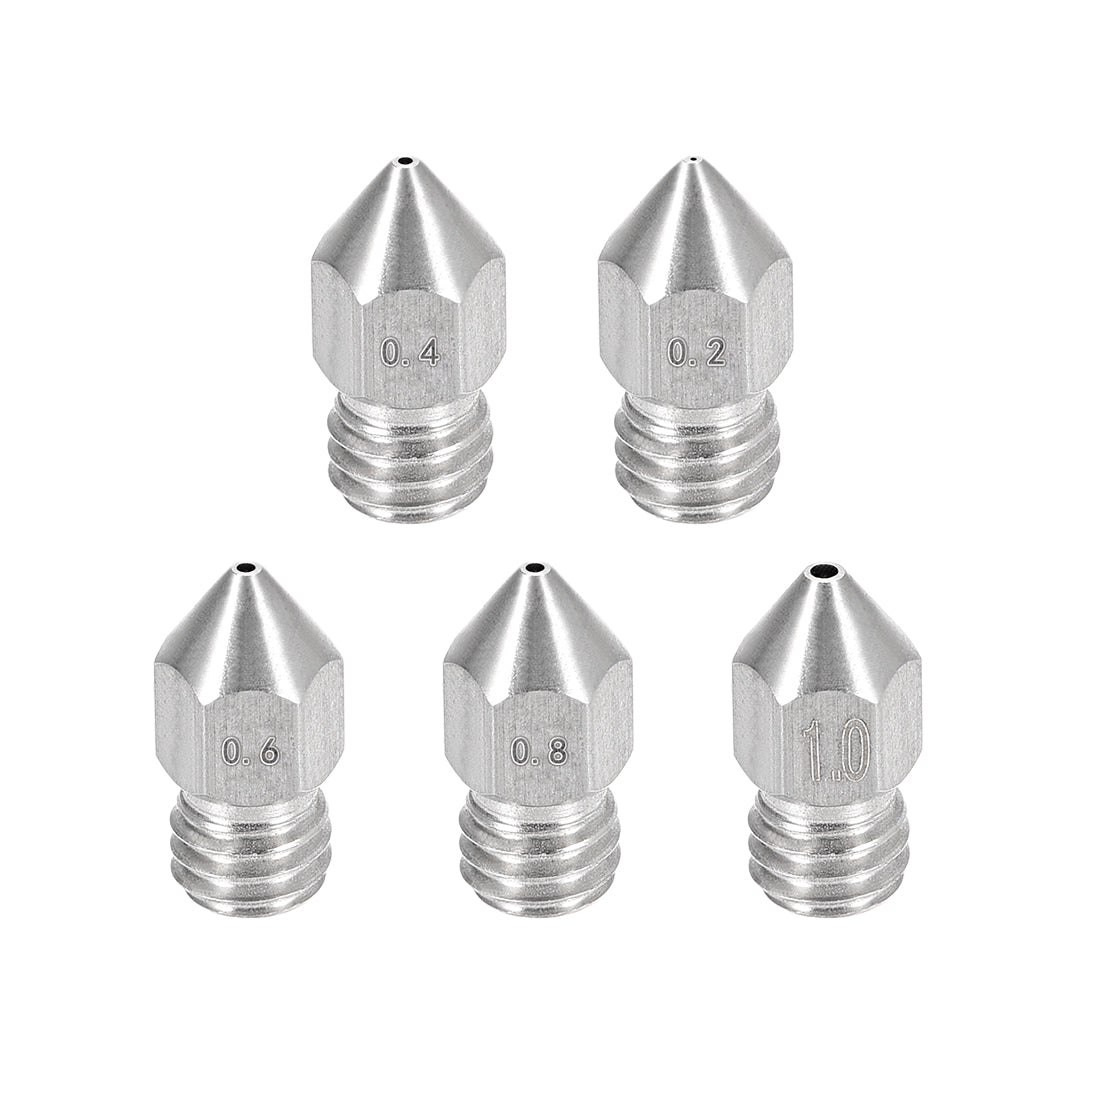 uxcell Uxcell 3D Printer Nozzle Fit for MK8, for 1.75mm Filament Stainless Steel,0.2mm - 1mm Total 5pcs